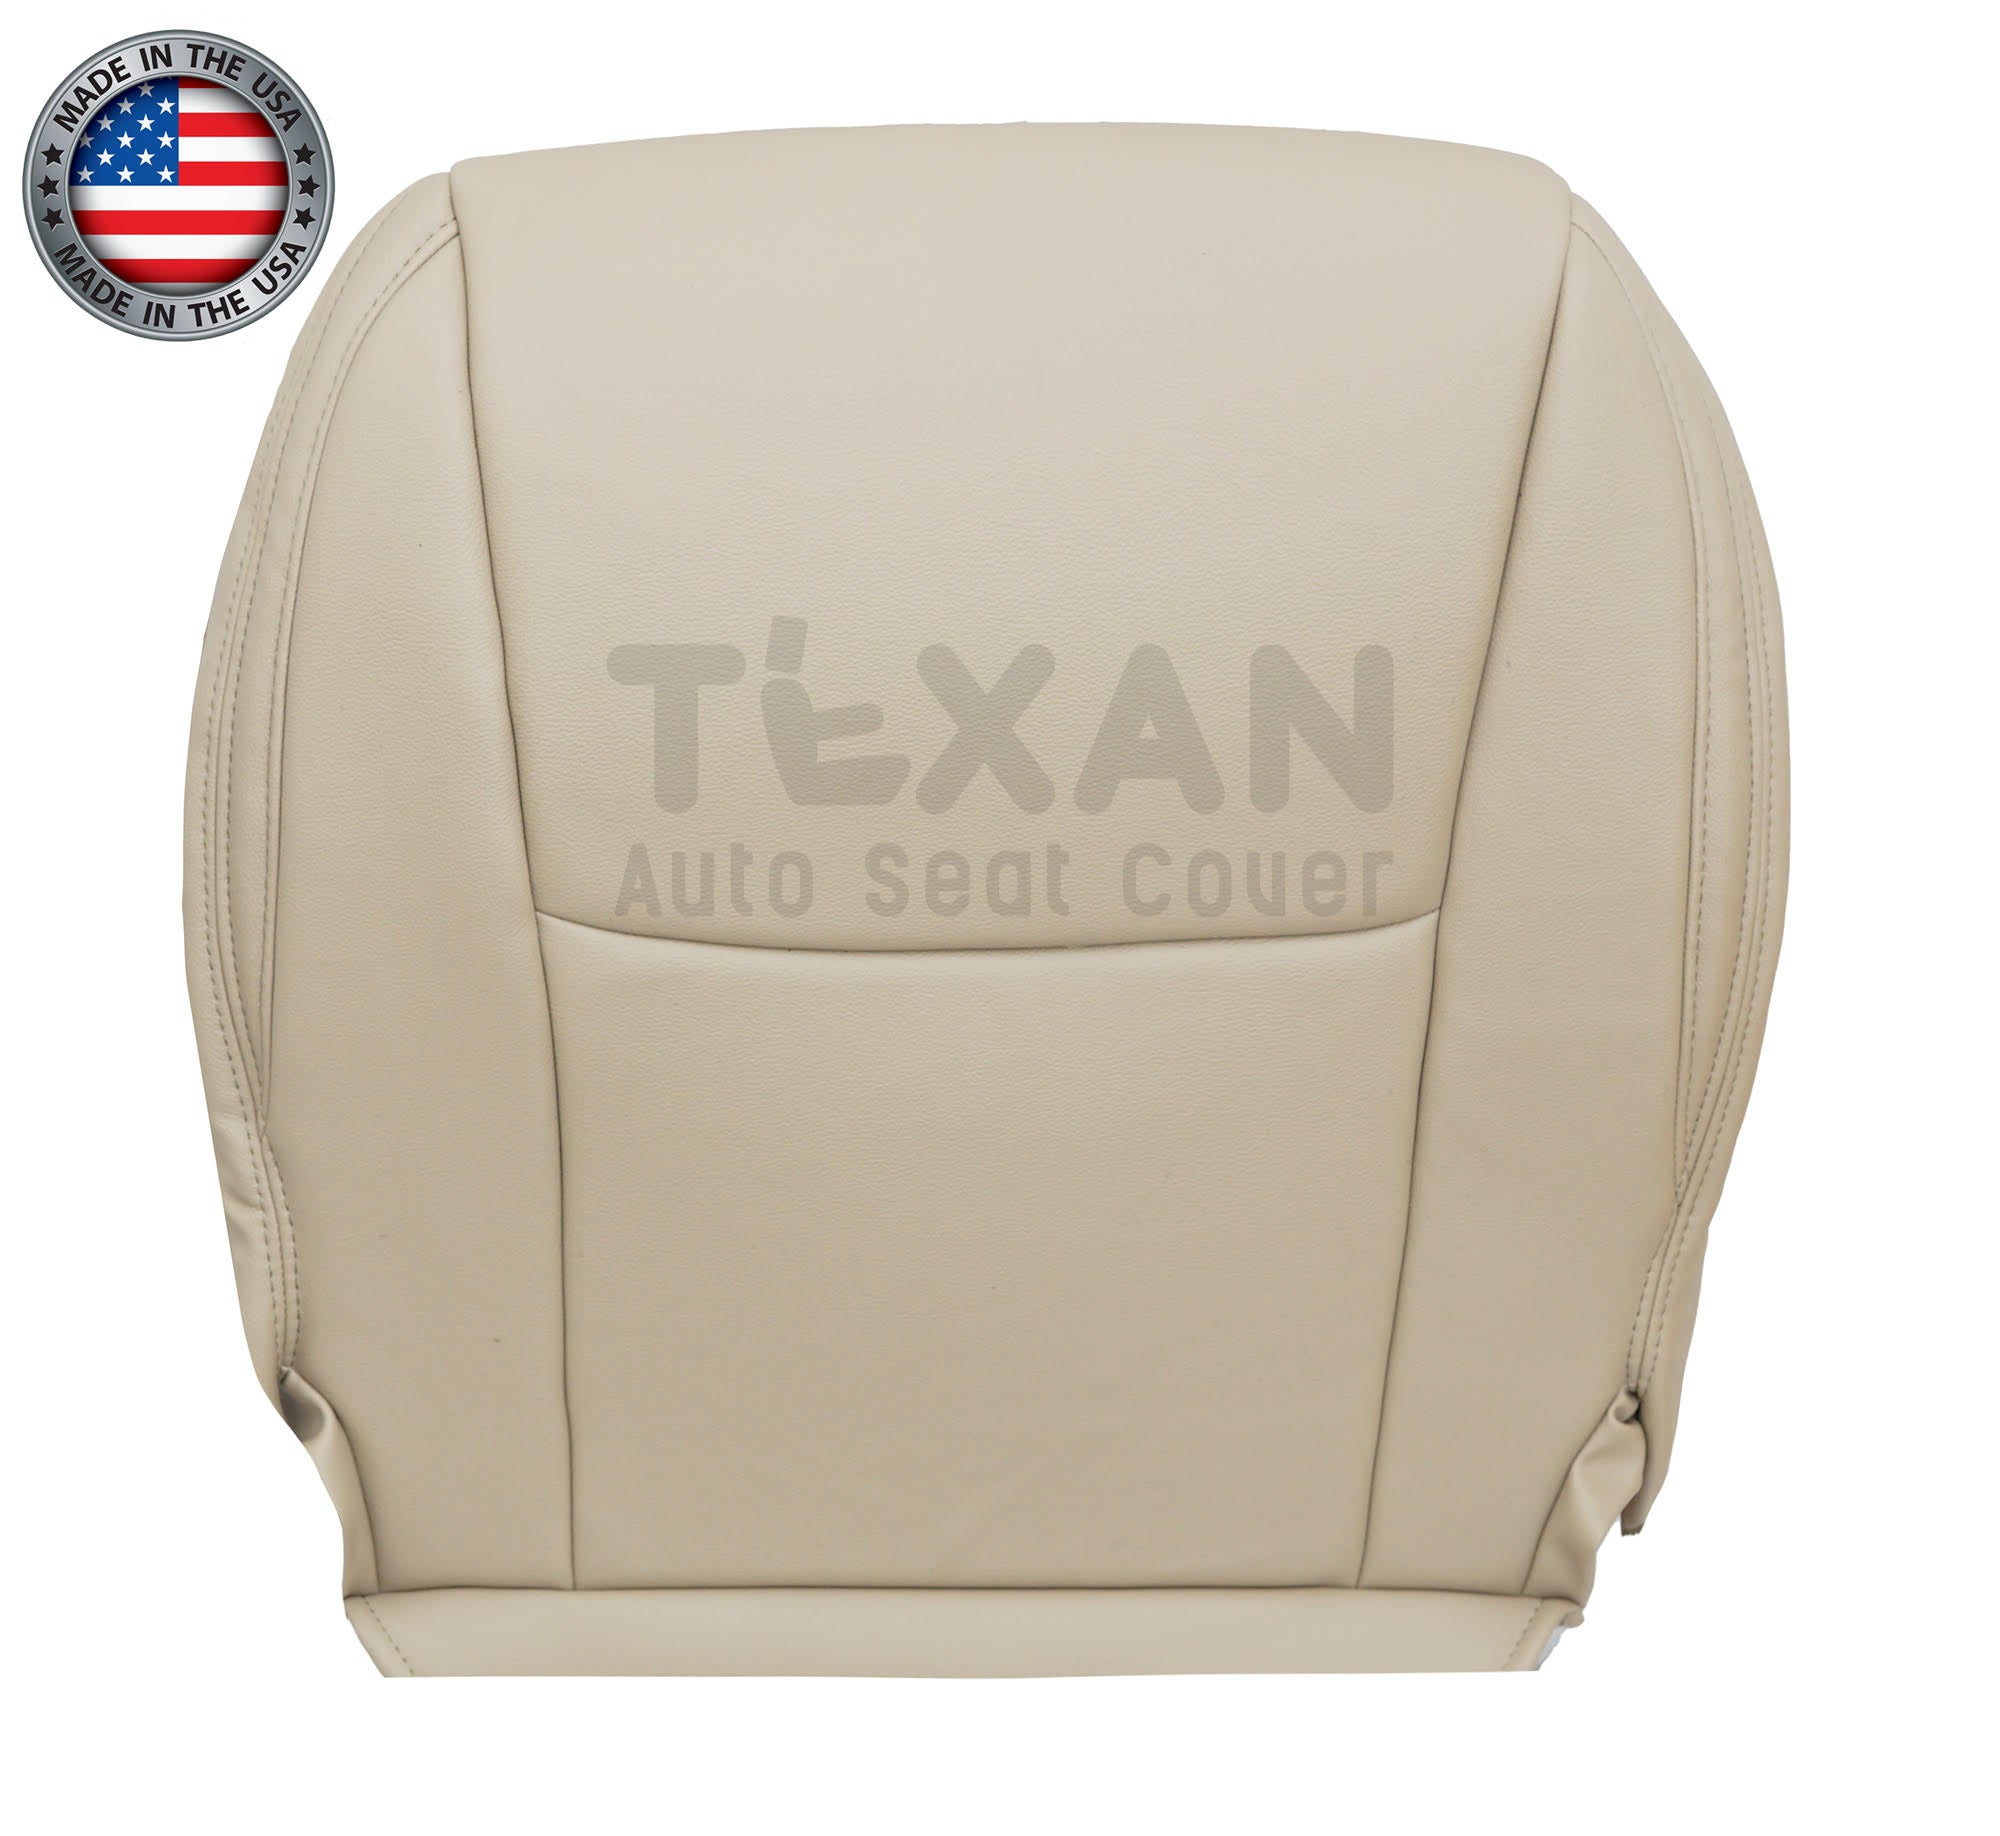 2003, 2004, 2005, 2006, 2007, 2008, 2009 Lexus Gx470 Driver Side Bottom Synthetic Leather Replacement Seat Cover Ivory Tan